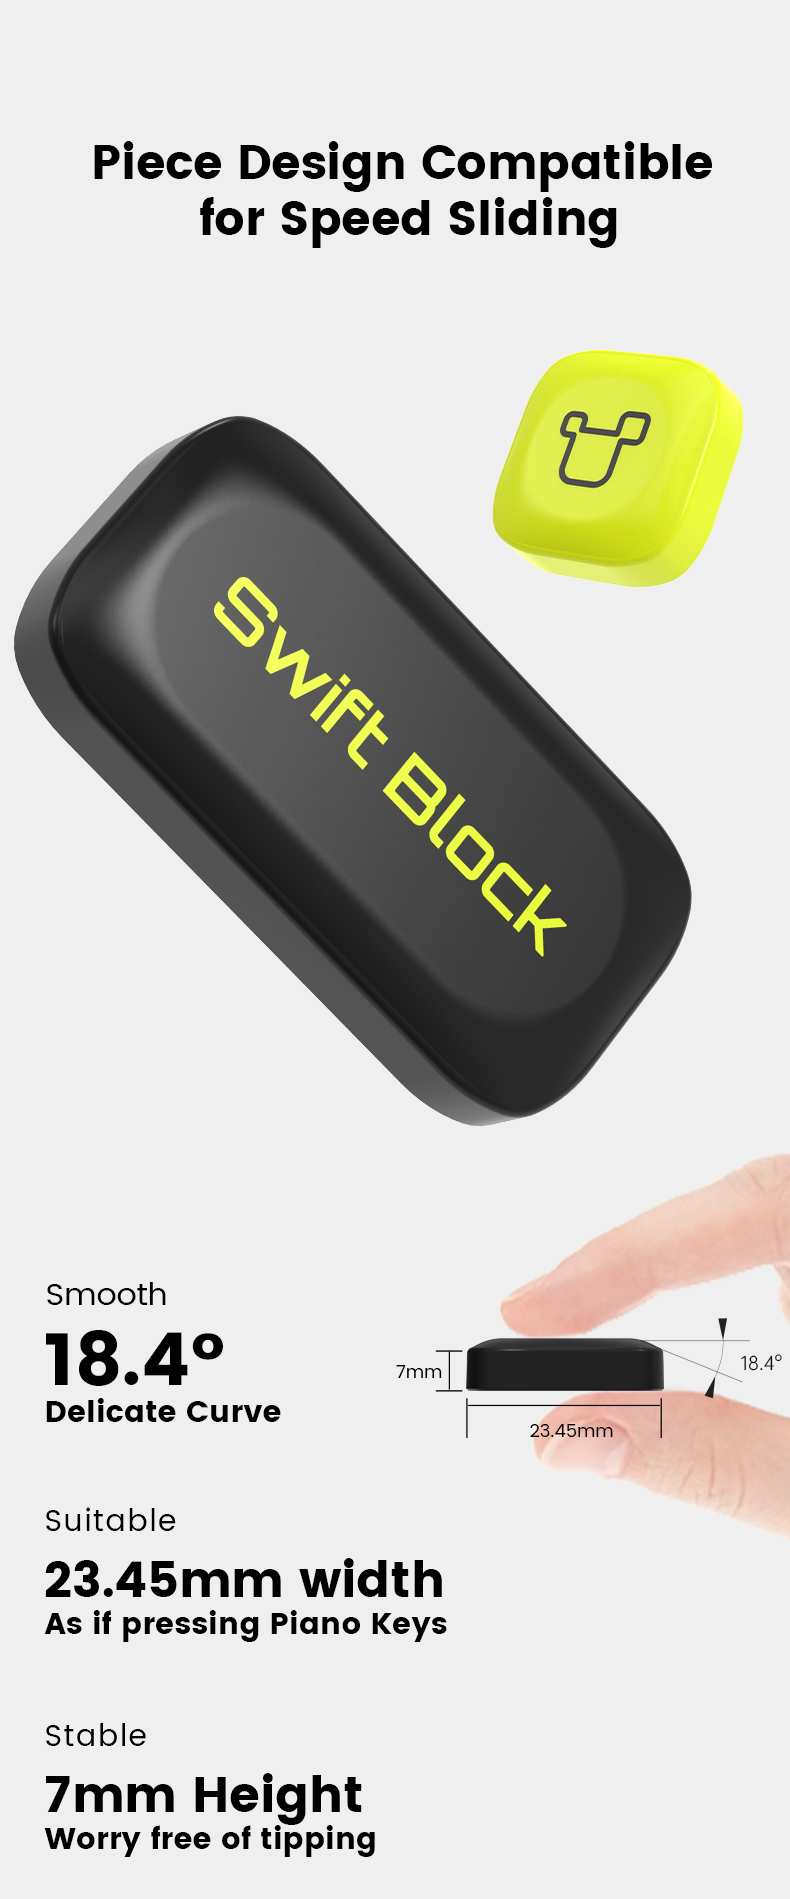 Swift Block WiSlide ▻ New puzzle by GANCUBE 